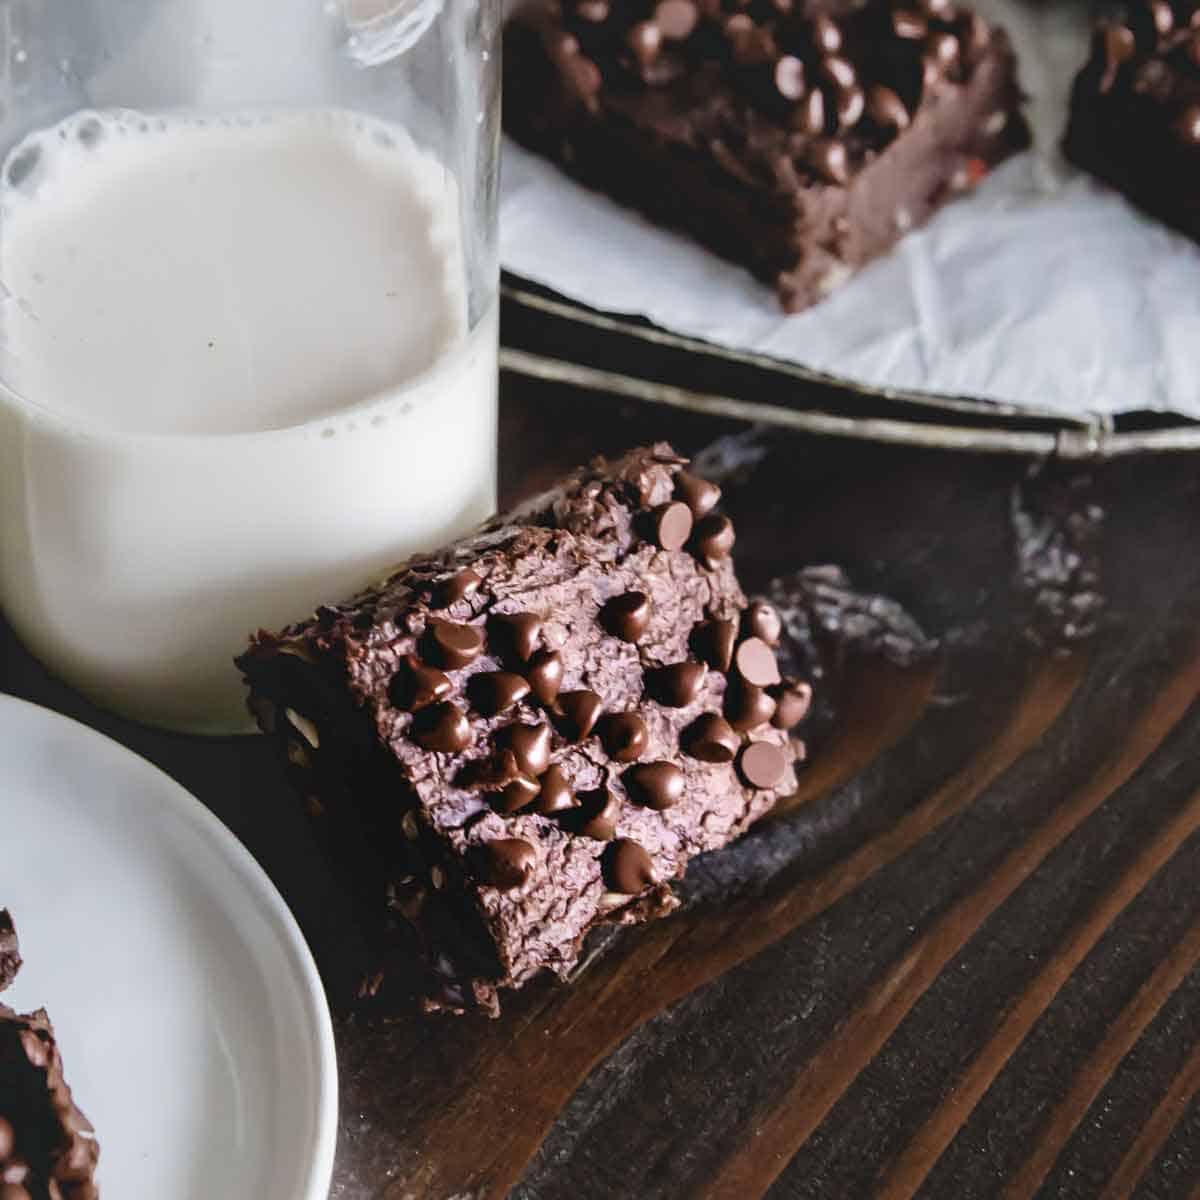 Black bean brownies (vegan/gluten-free) that take just 1 bowl and 20 minutes to prepare. Healthy, decadent and delicious!